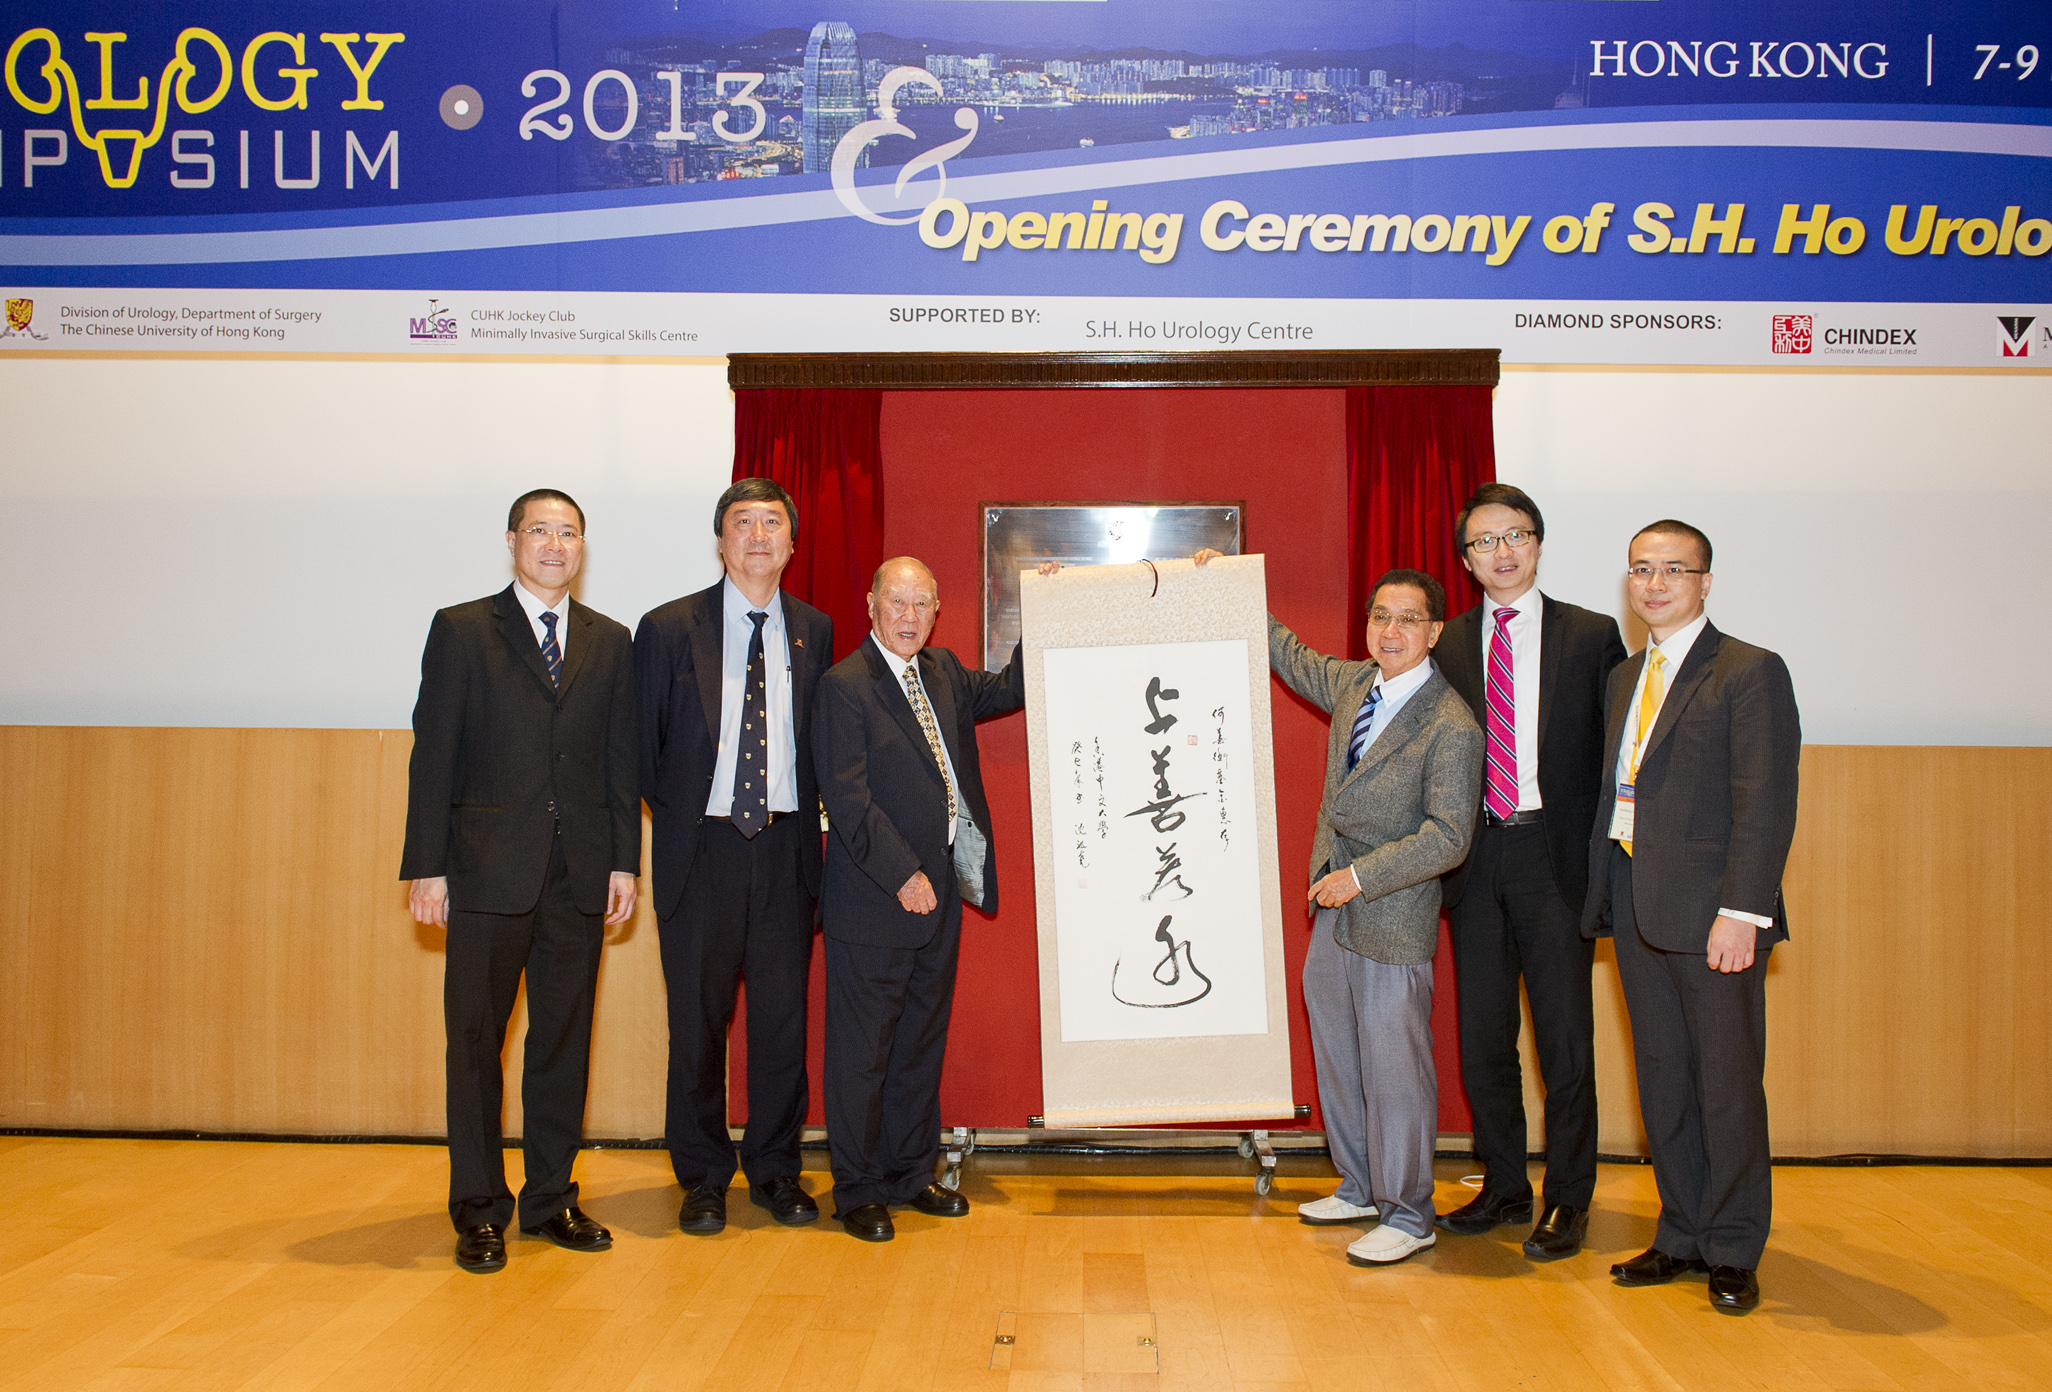 (From Left) Prof. Paul B.S. Lai, Chairman, Department of Surgery, CUHK; Prof. Joseph J.Y. Sung, Vice-Chancellor and President, CUHK; Dr. David Tzu-cho Ho, Chairman, The S.H. Ho Foundation Limited; Dr. Tzu-leung Ho, Governor, The S.H. Ho Foundation Limited; Prof. Francis K.L. Chan, Dean, Faculty of Medicine, CUHK and Prof. Anthony C.F. Ng, Director, The S.H. Ho Urology Centre, Department of Surgery, CUHK officiate the Opening Ceremony of The S.H. Ho Urology Centre.